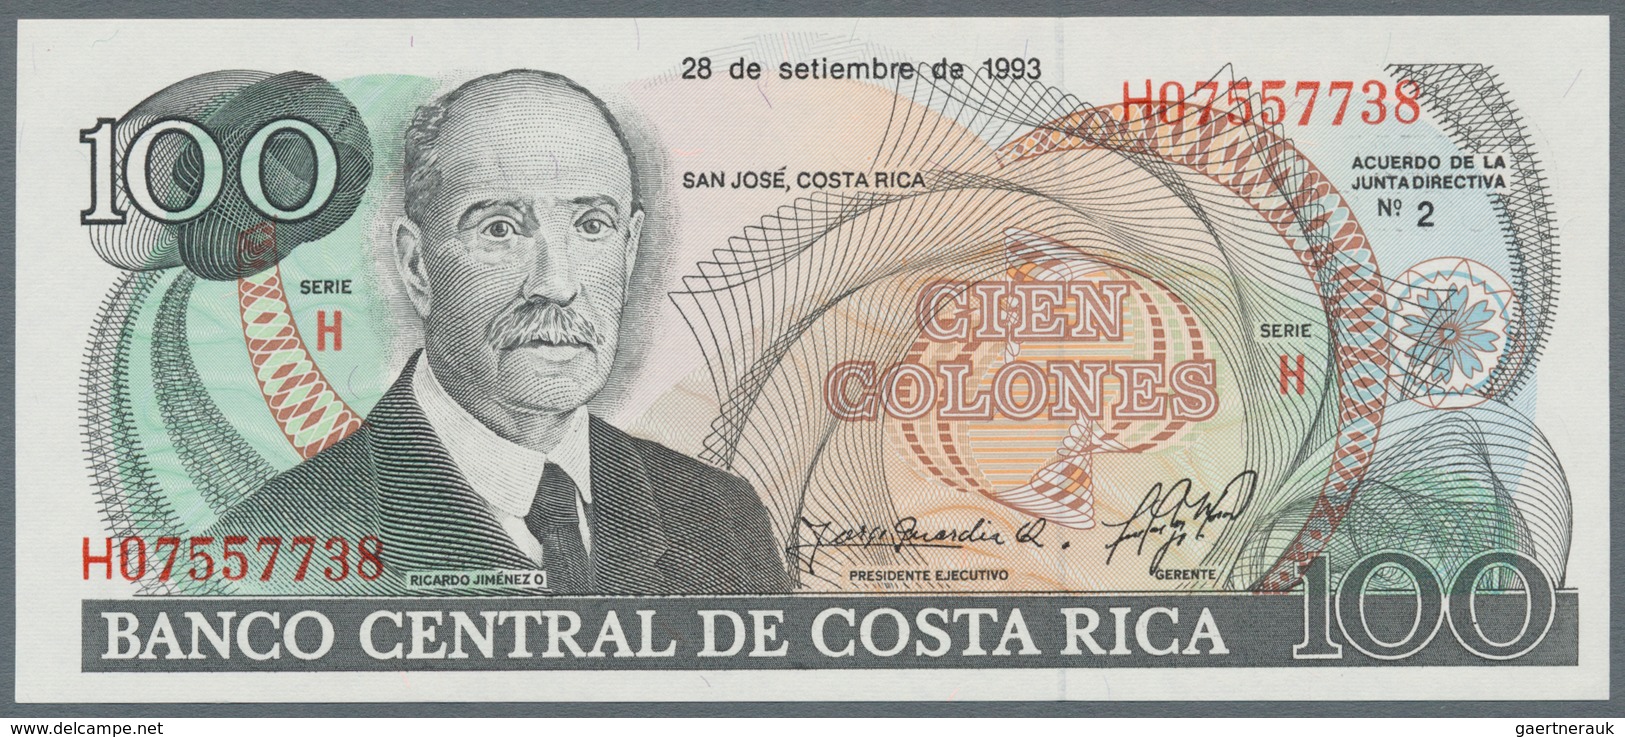 South America / Südamerika: large collection of about 700 banknotes from Asia and America as well as